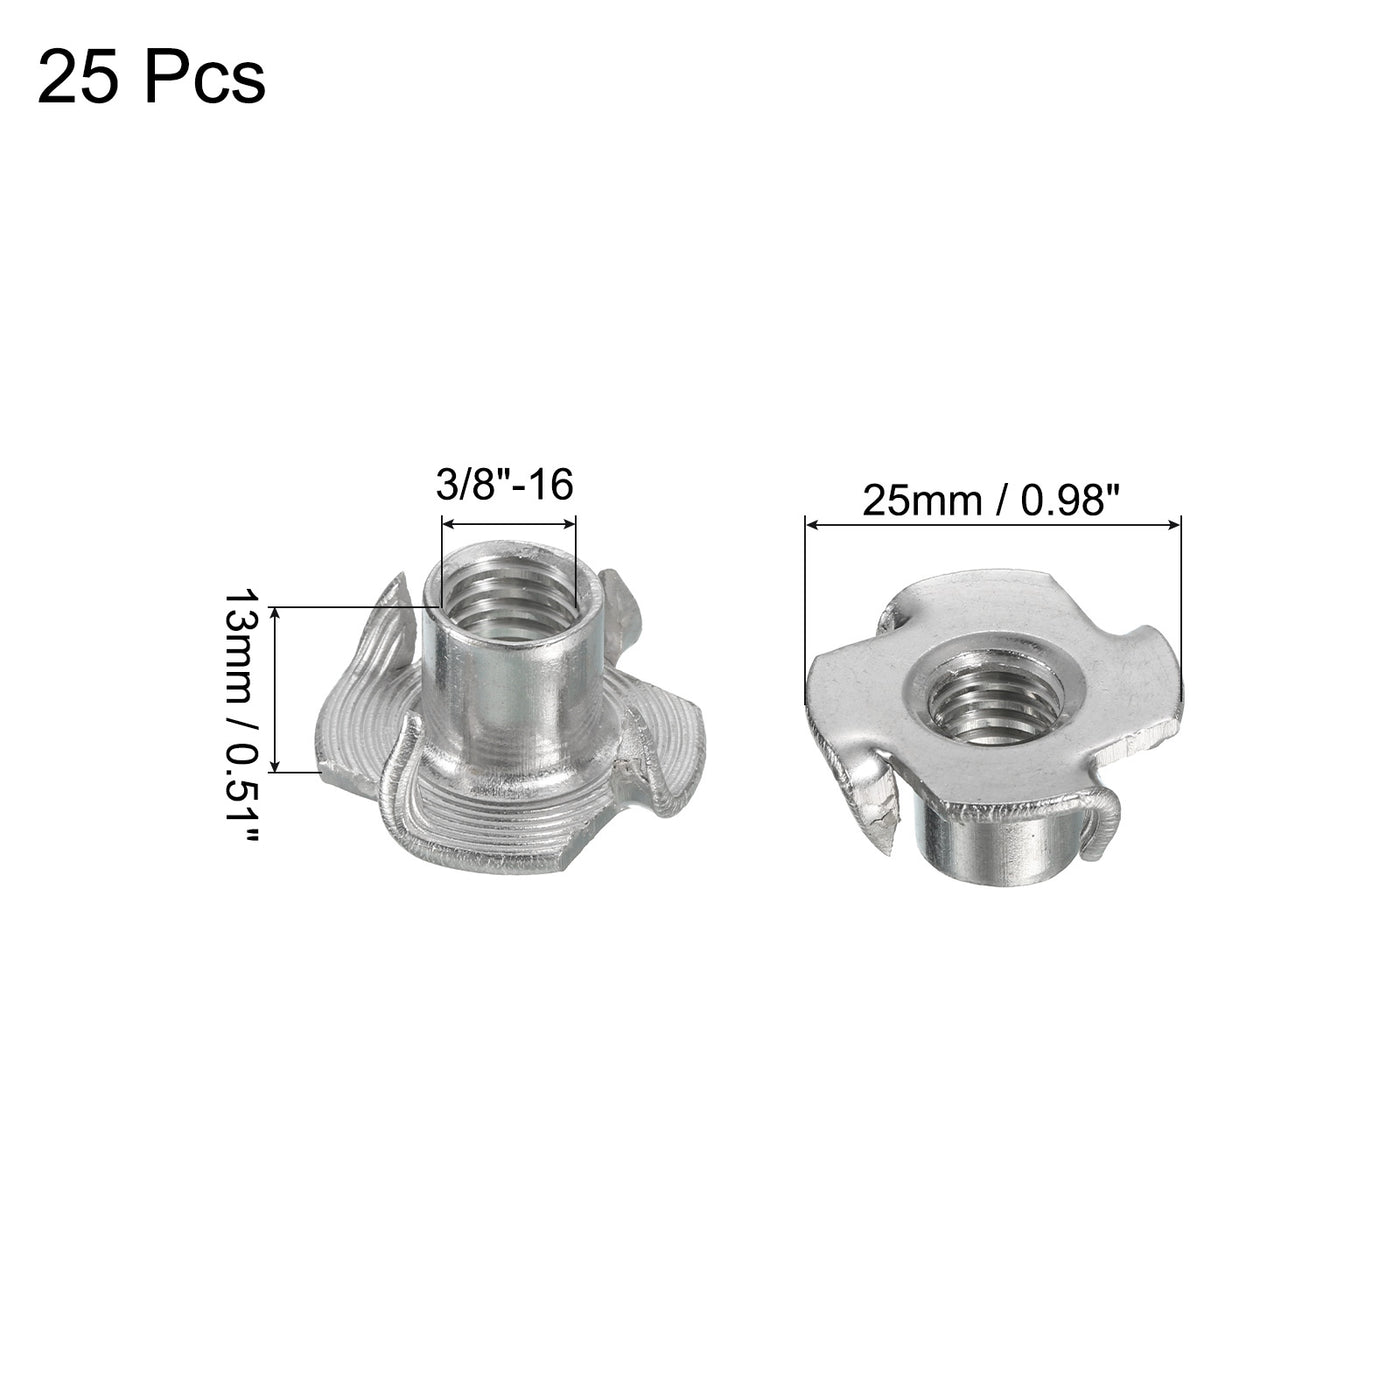 uxcell Uxcell 3/8"-16 T-nut 25pcs 304 Stainless Steel 4 Pronged Tee Nuts Threaded Insertion